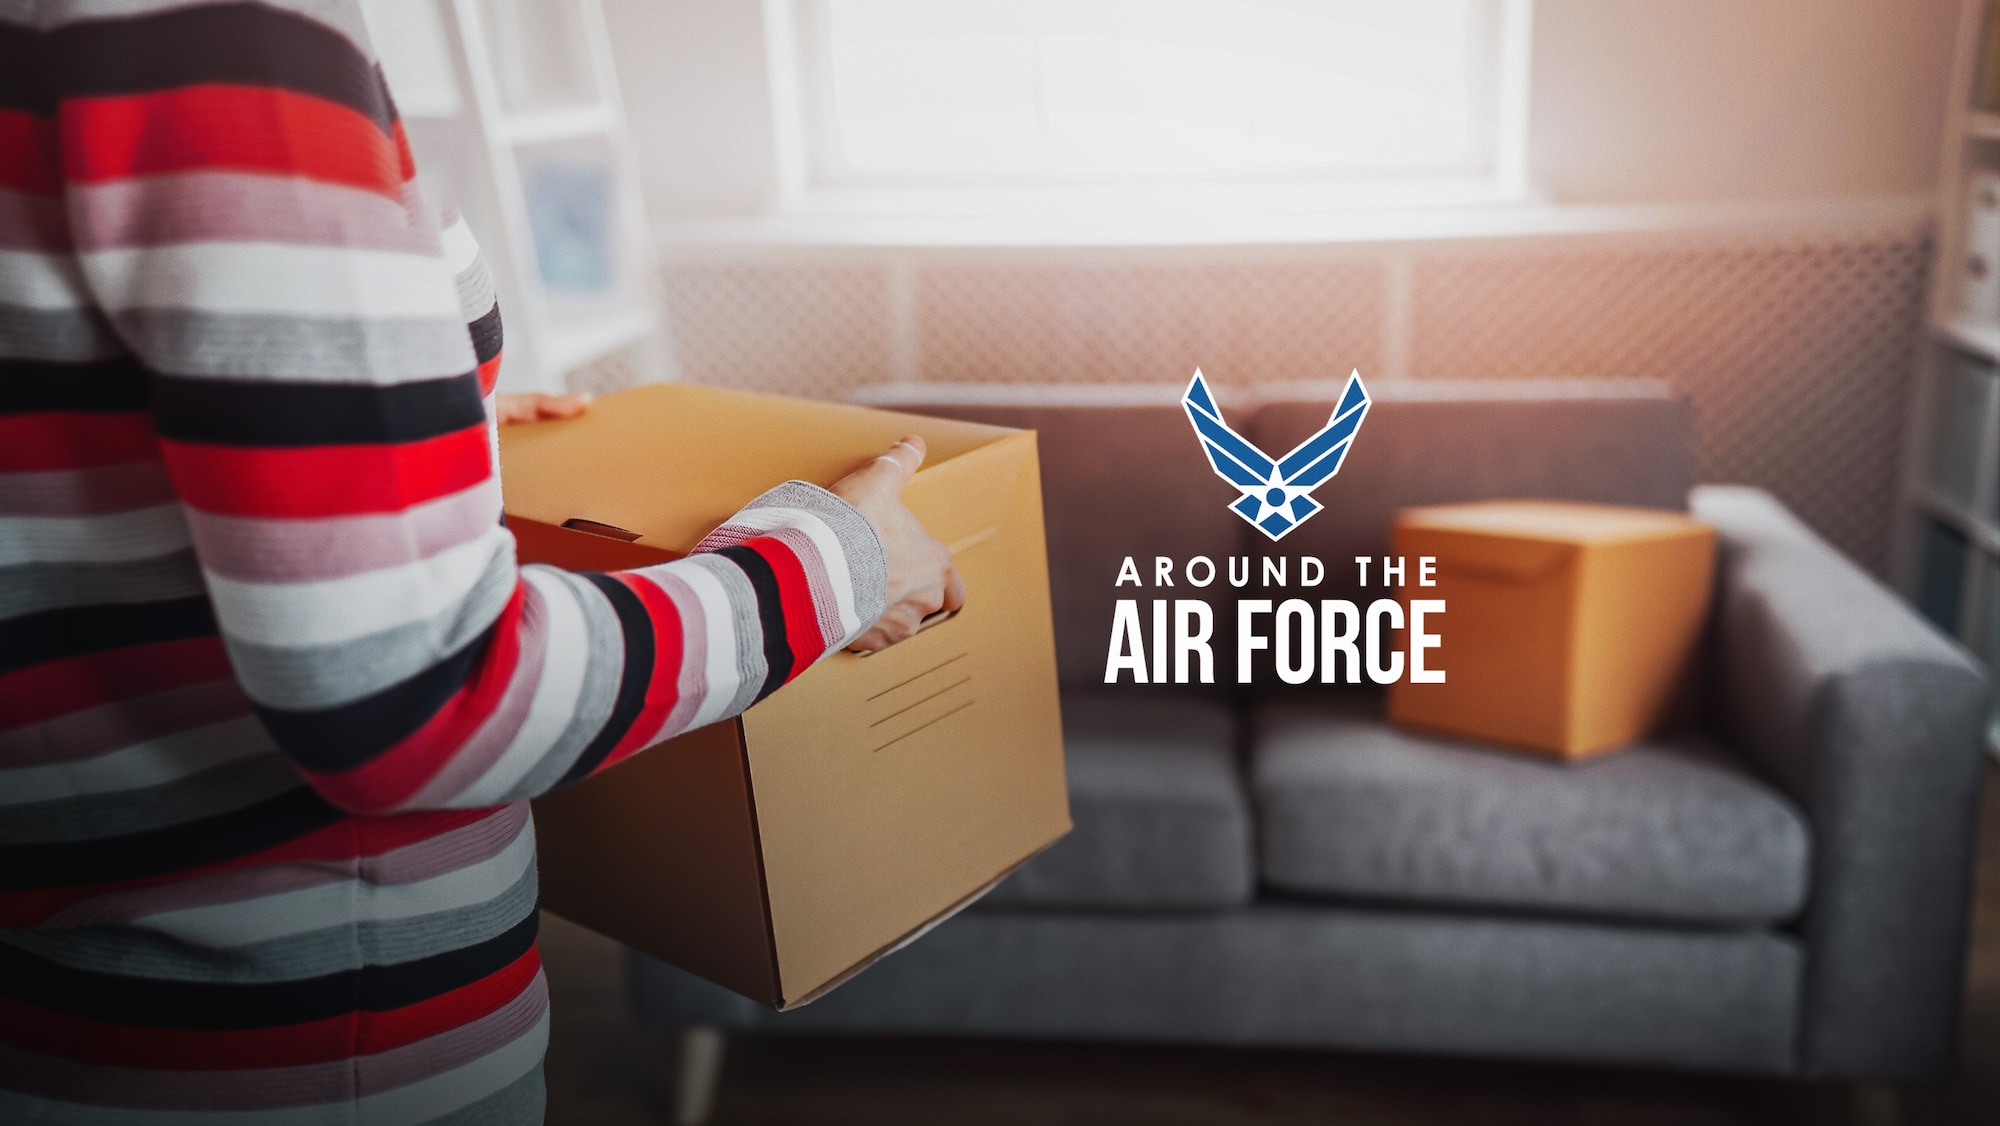 In this week’s look around the Air Force, funding for permanent change of station moves and bonus programs is restored, the Department of Justice reinforces new Federal protections for military members and their spouses, and a cutting-edge effort from the Air Force is taking applications for a fellowship program.